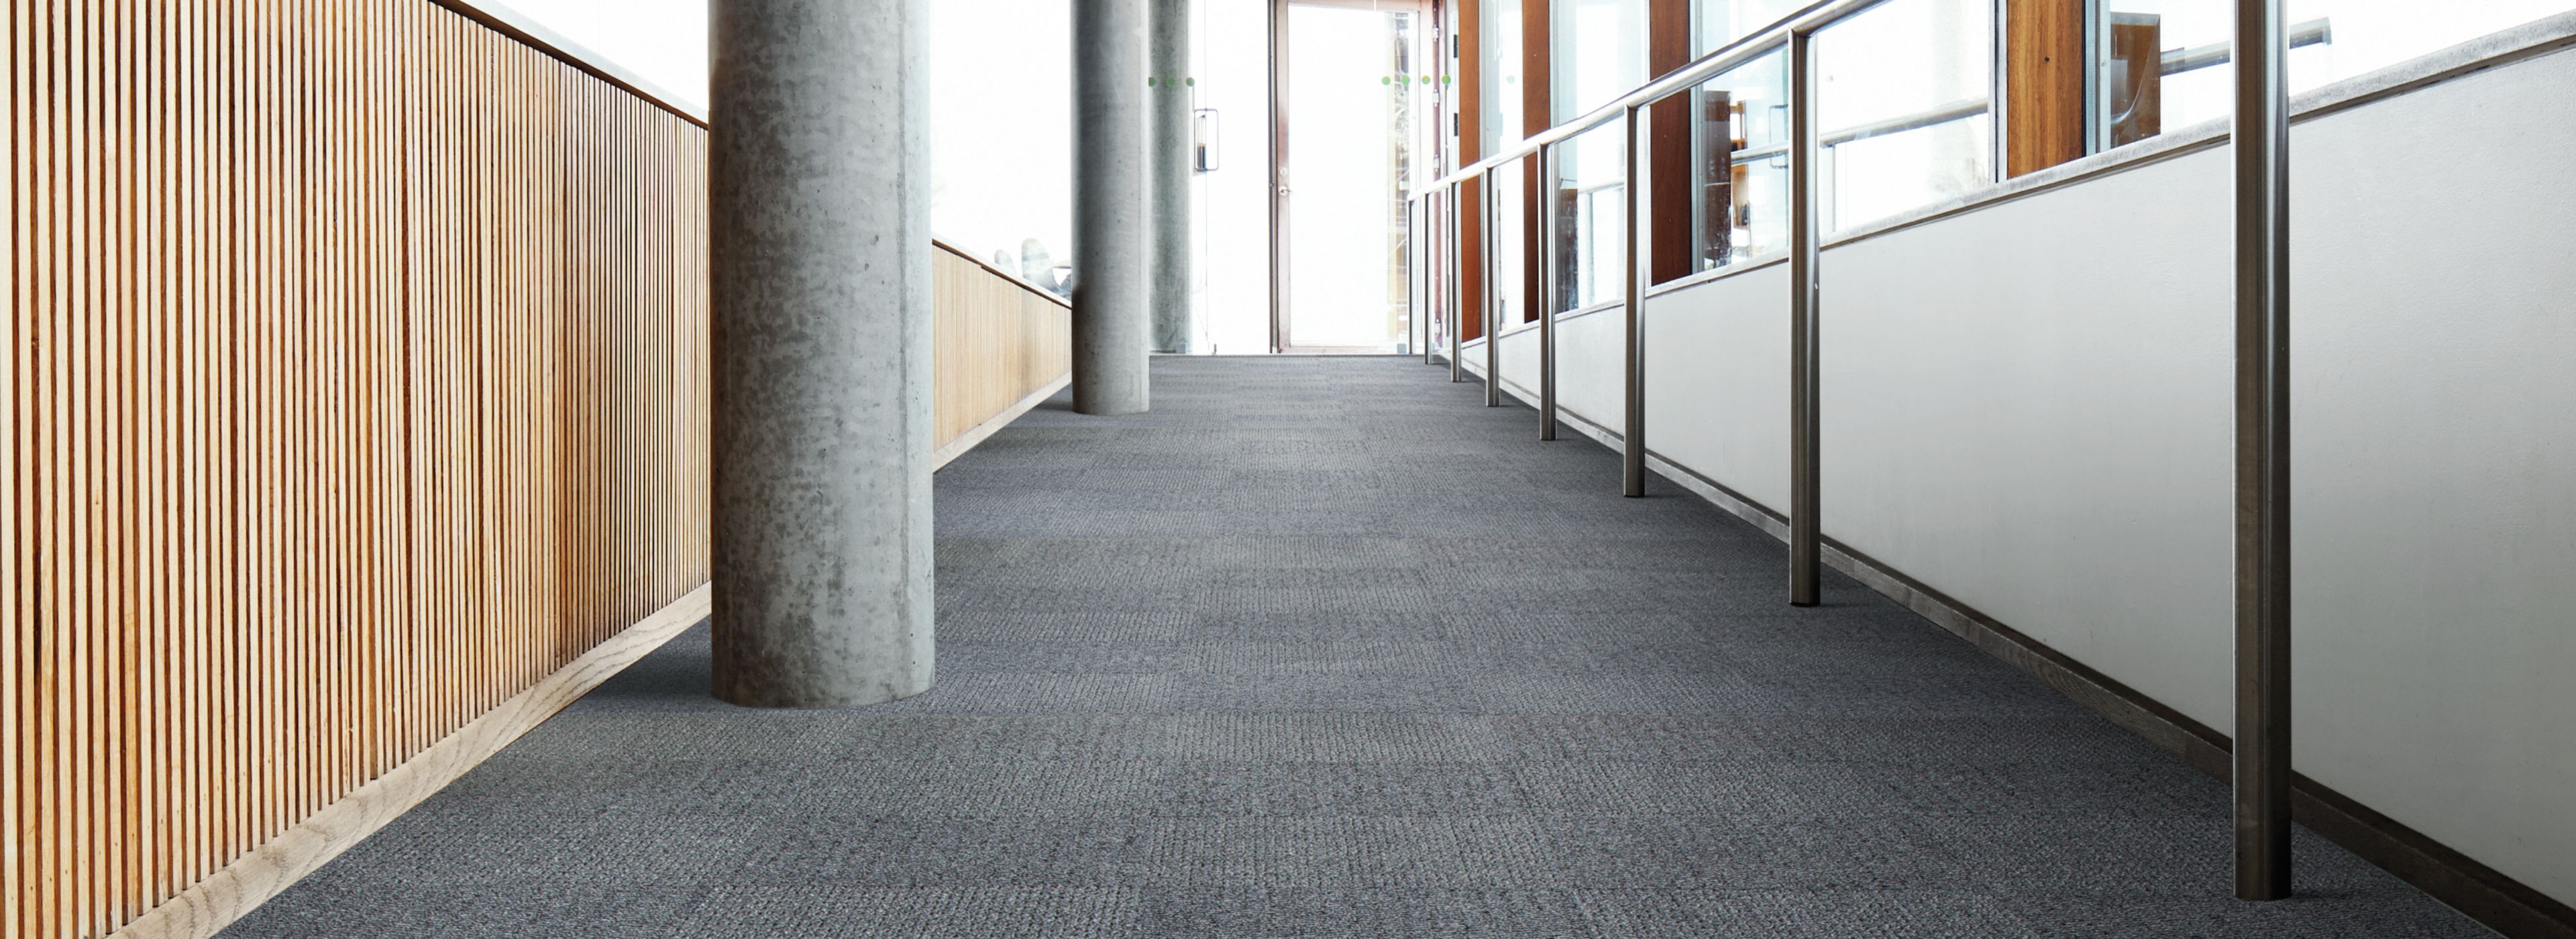 Interface SR799 carpet tile in a hallway setting with columns image number 1